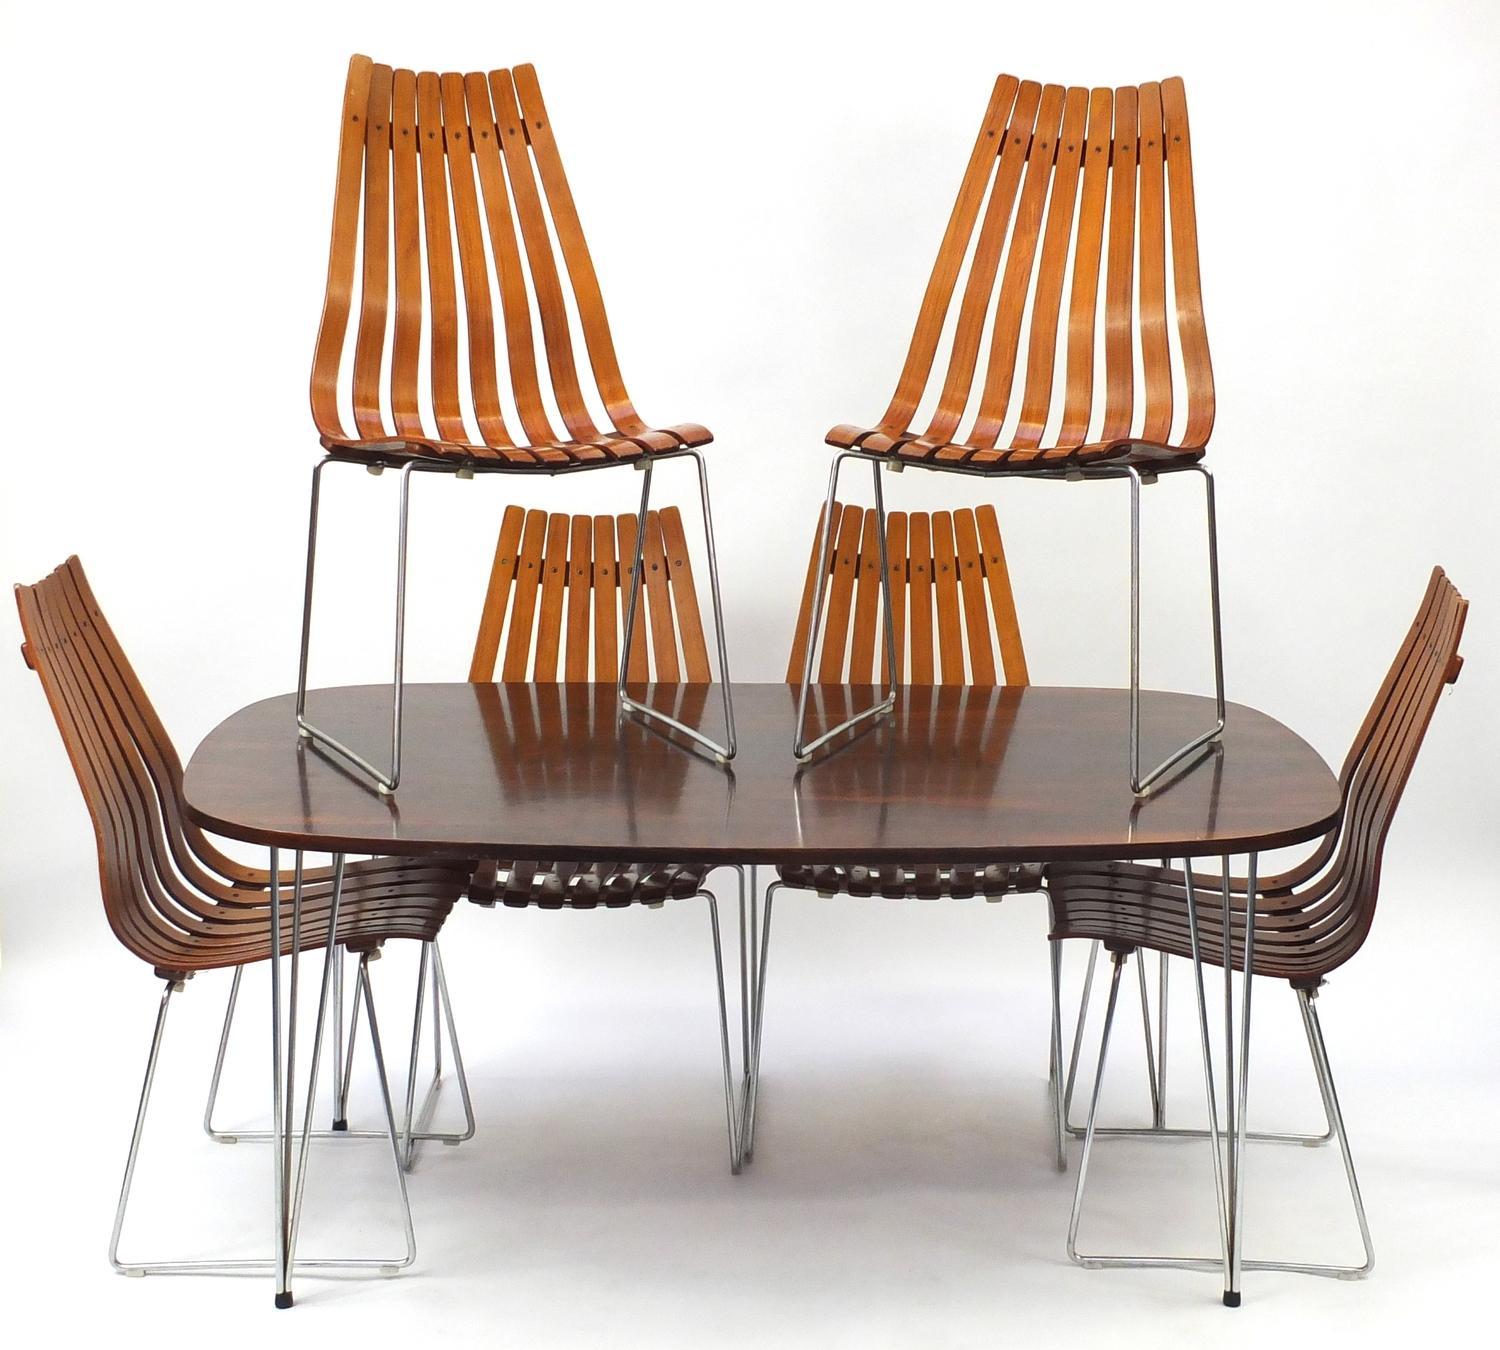 Norwegian Hans Brattrud Rosewood Dining Table & Six Scandia Chairs, Hove Mobler circa 1965